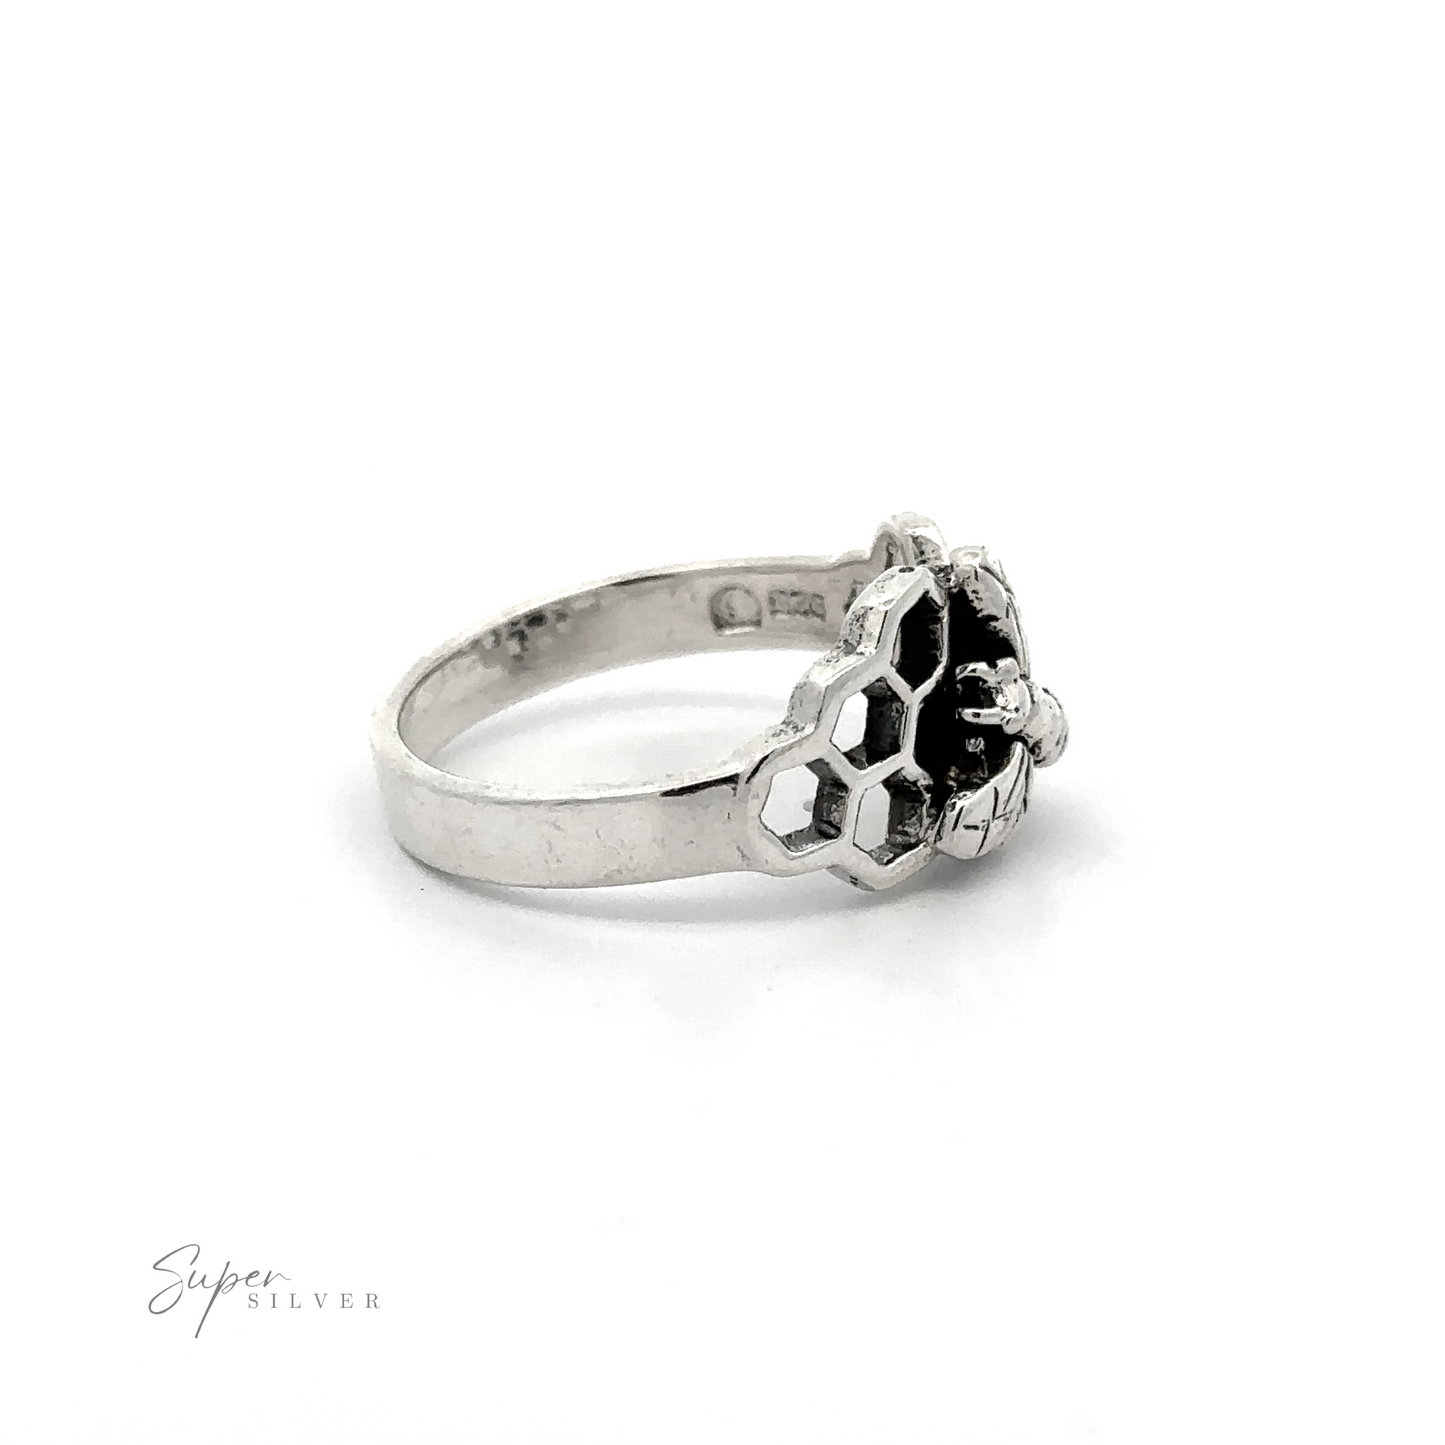 A Honey Bee with Honeycomb ring with black and white stones.